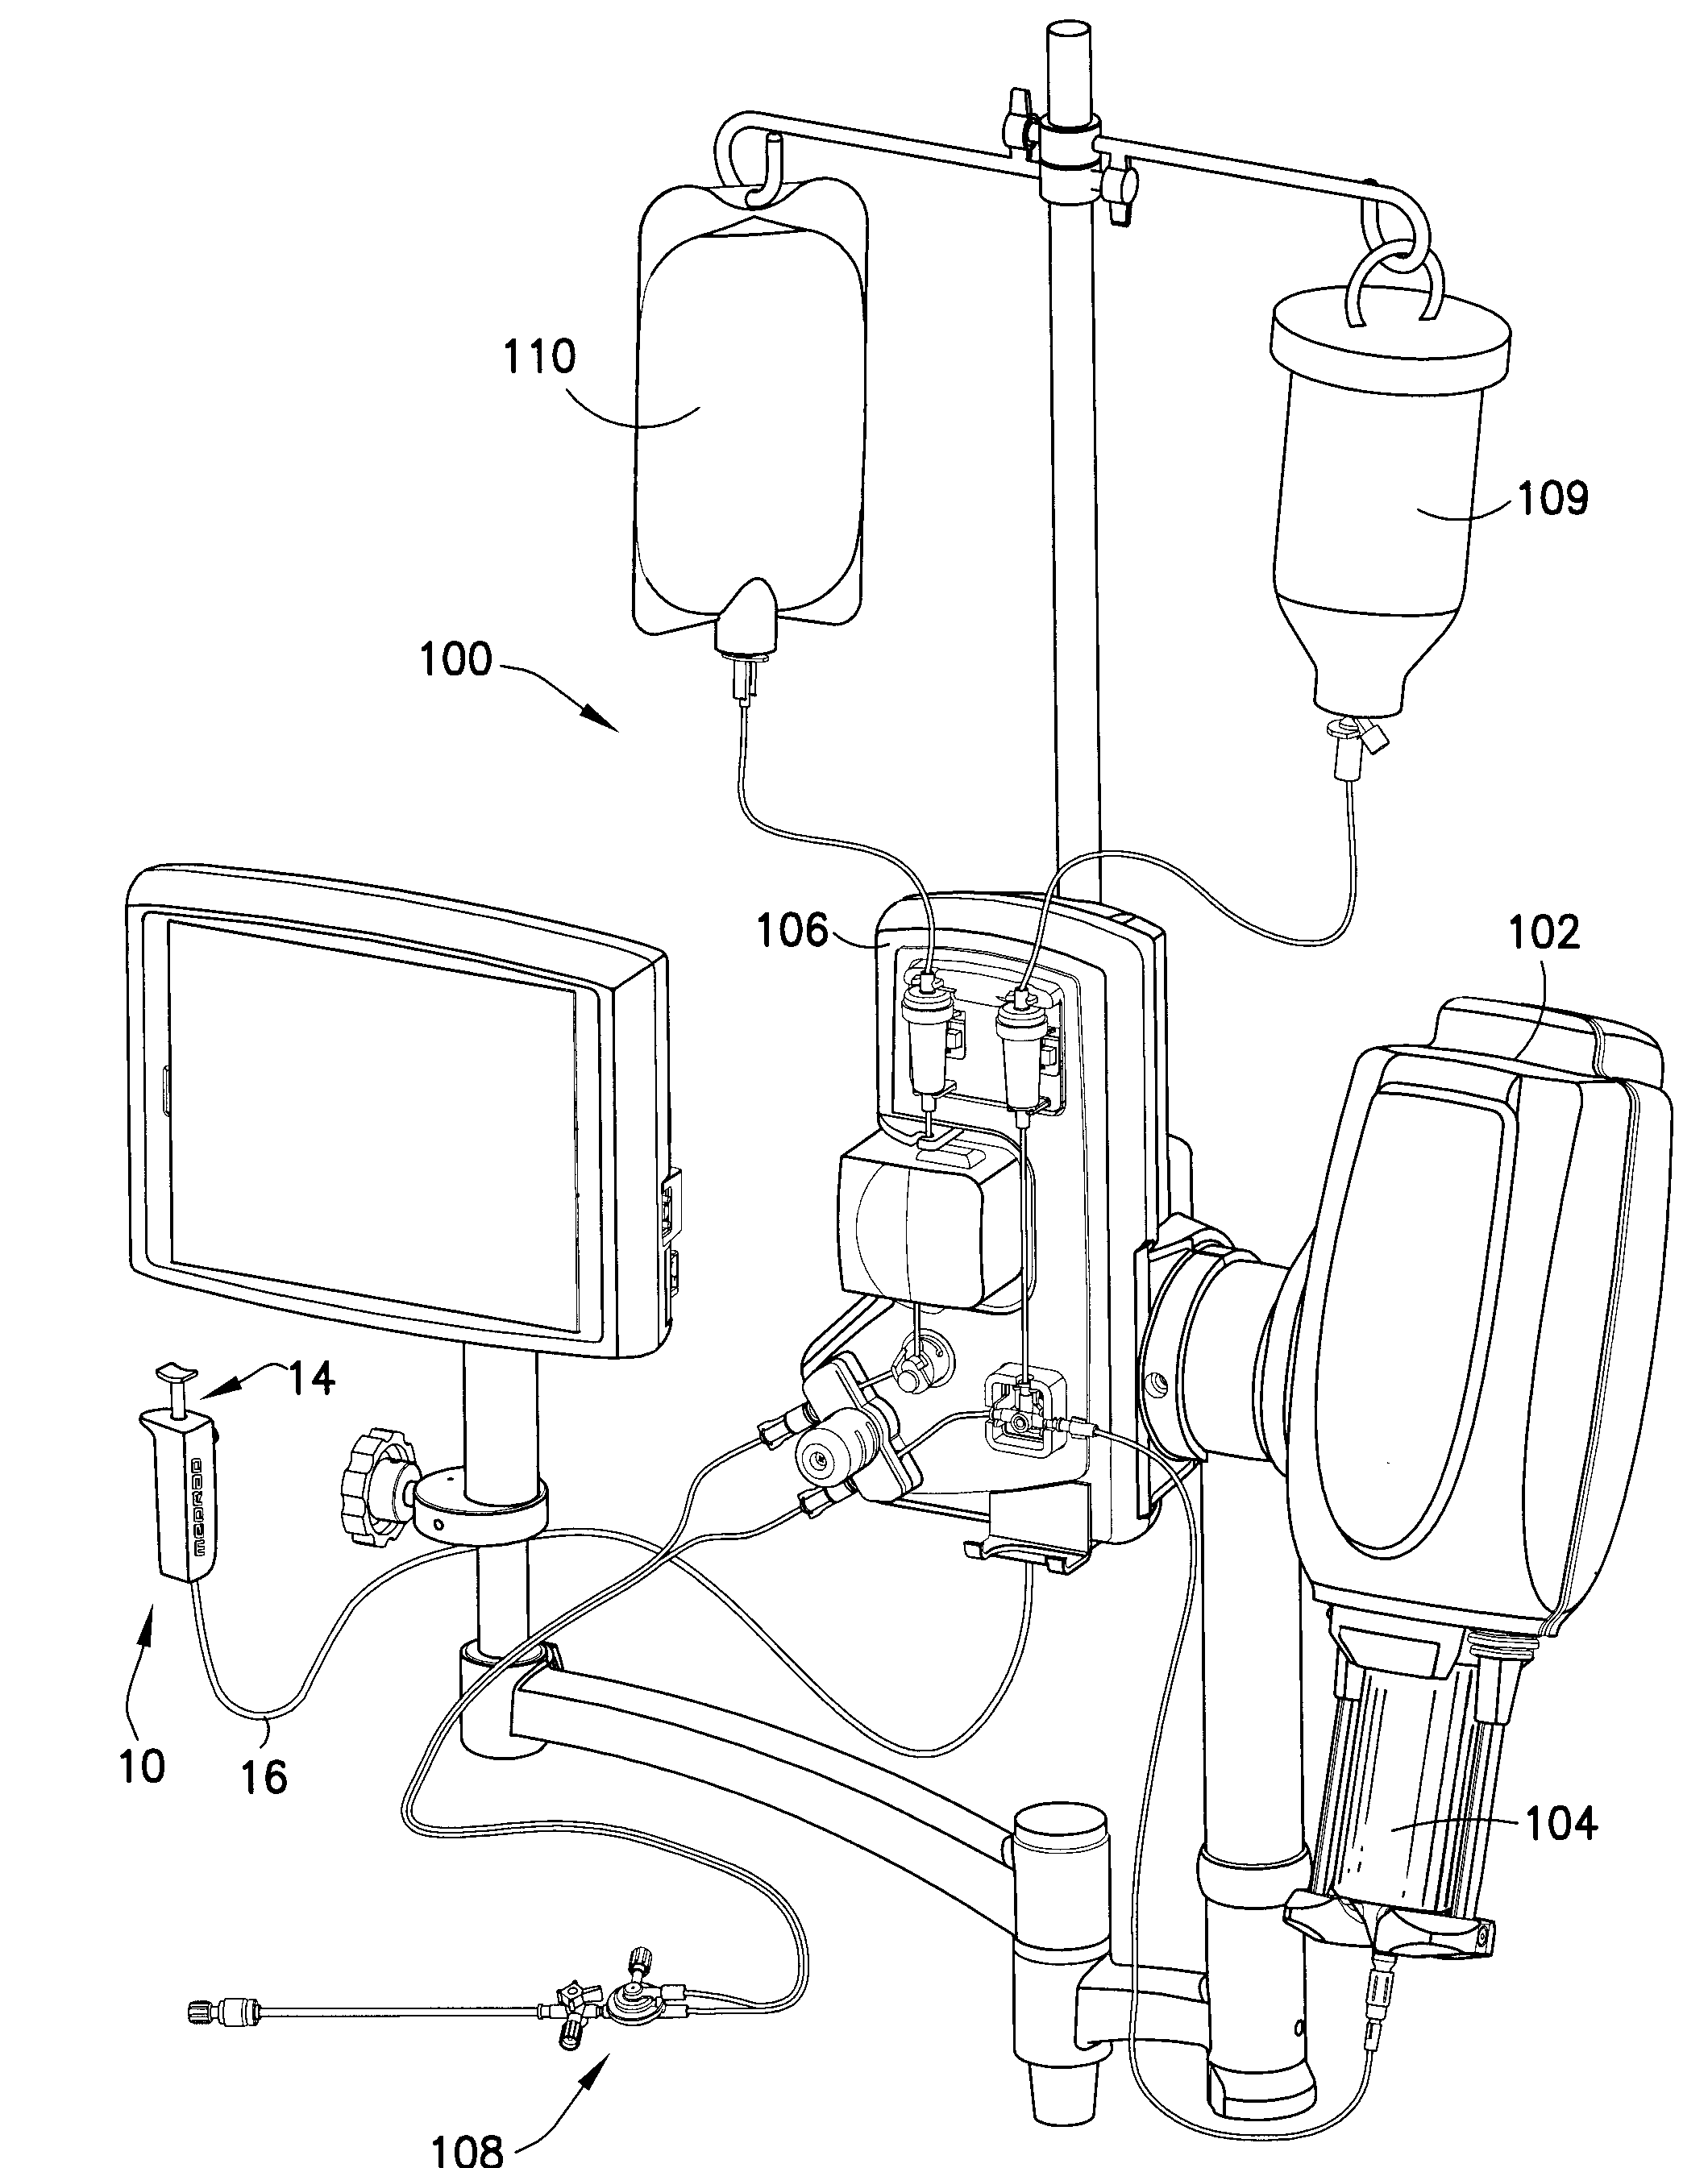 Fluid mixing control device for a multi-fluid delivery system